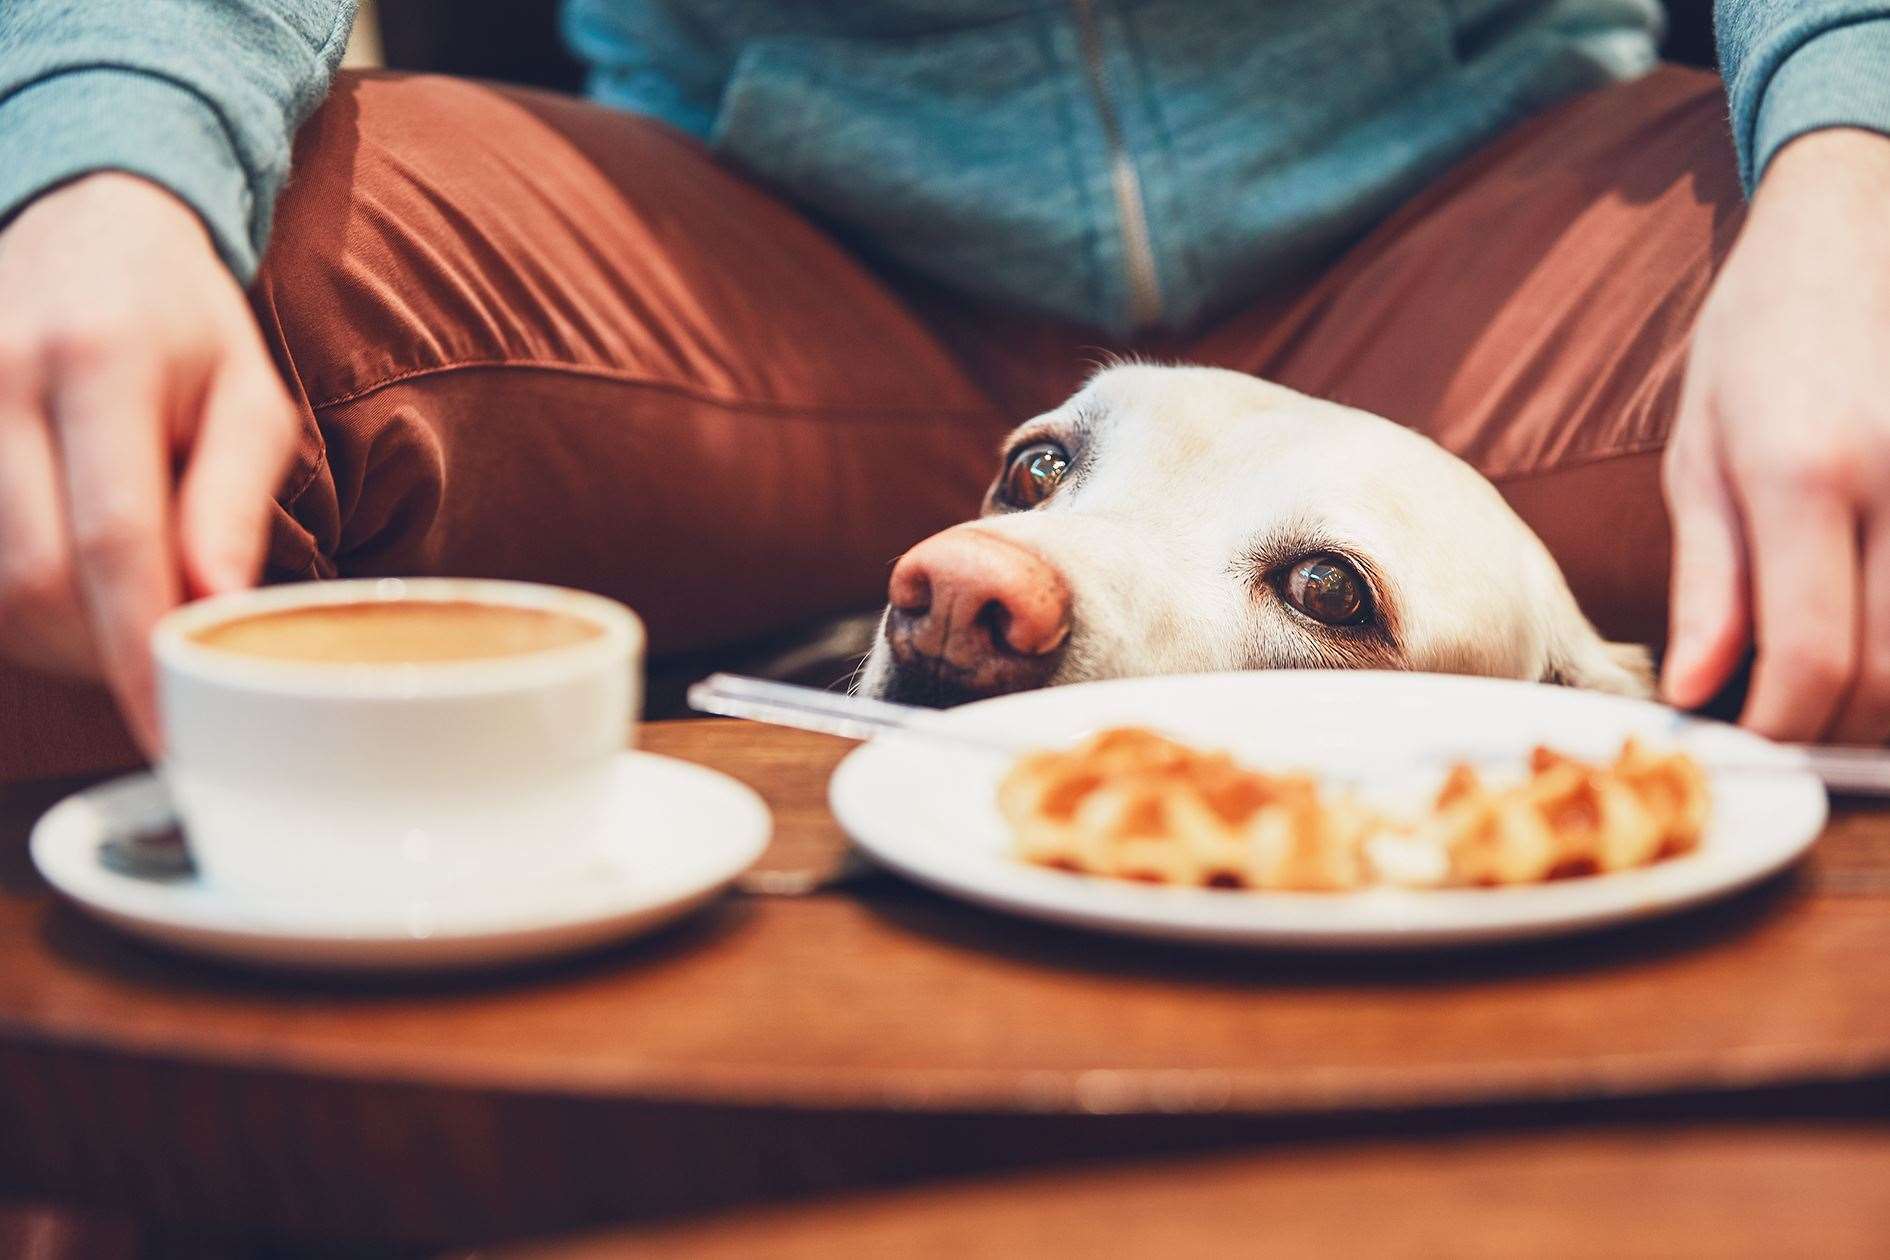 A number of cafes in Inverness are happy to welcome in dogs with their owners.